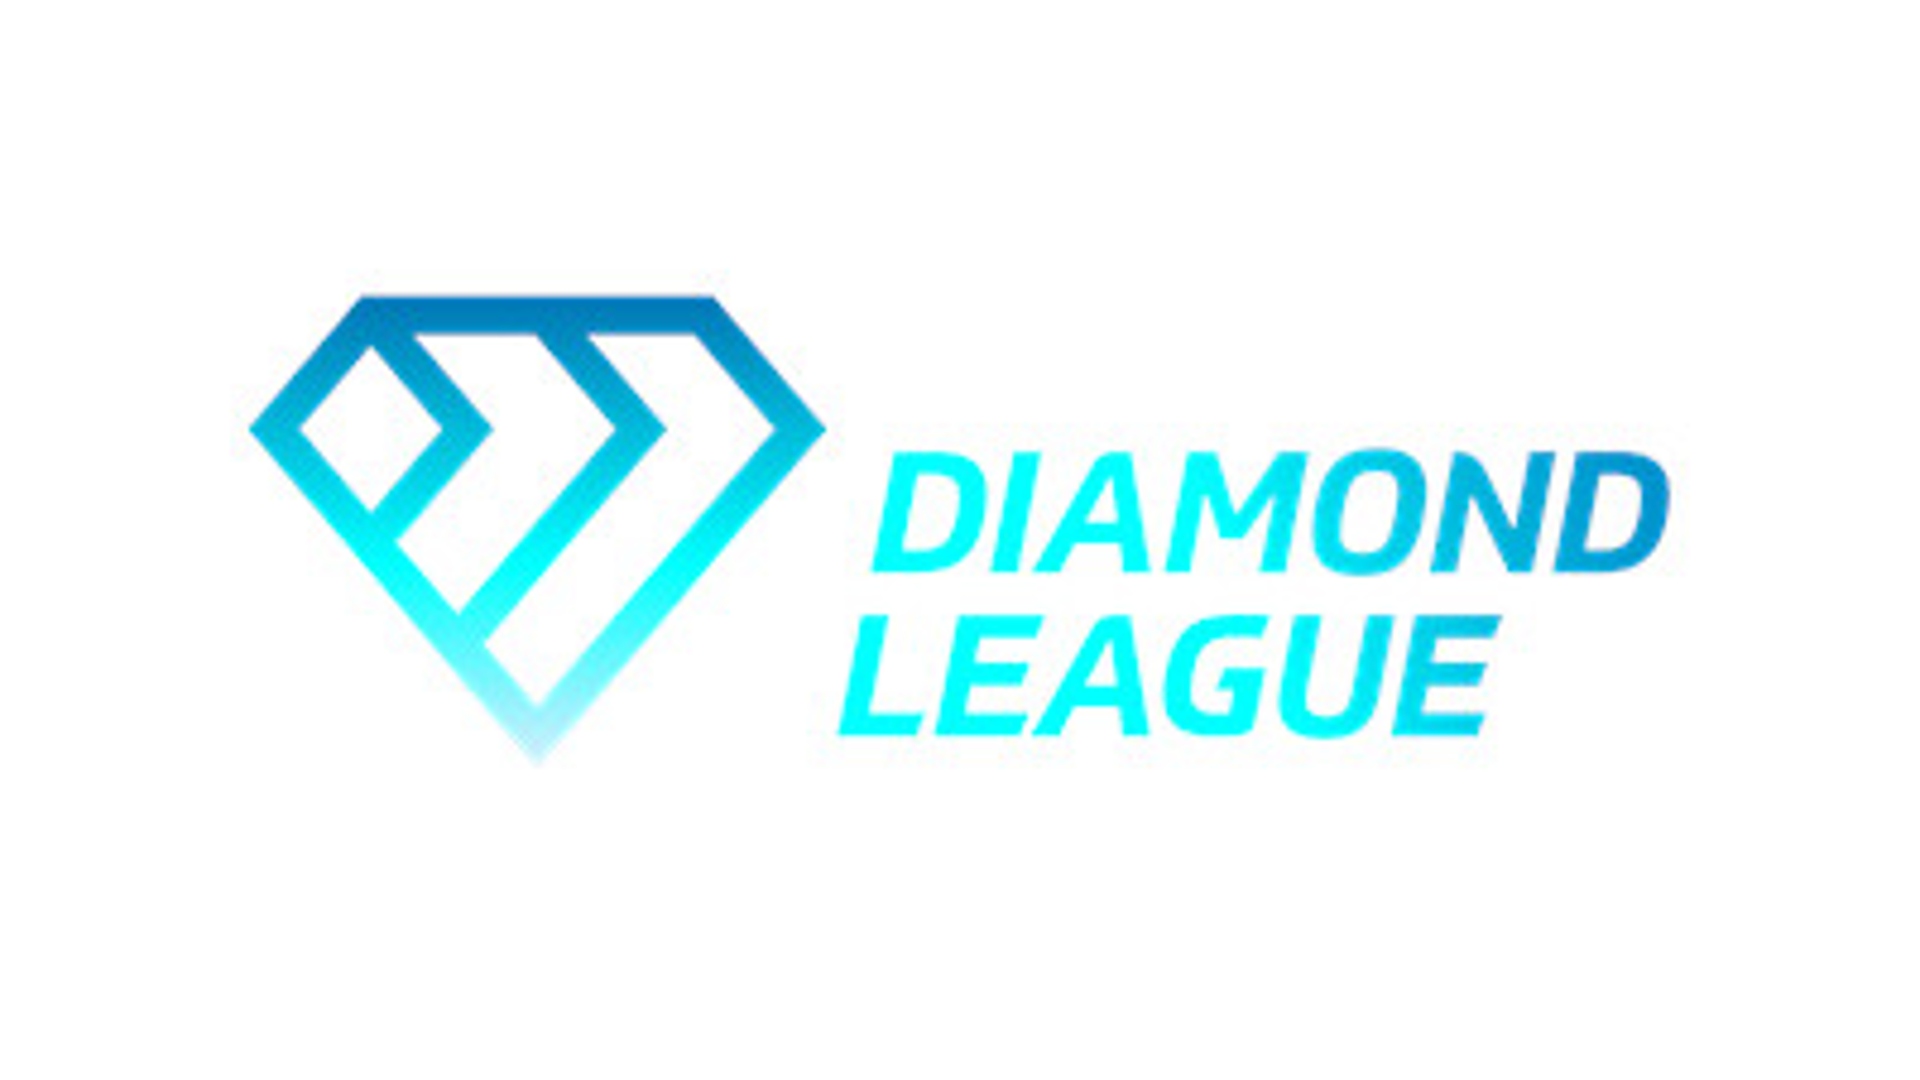 Diamond League Final 2022 LIVE Streaming, When and Where to Watch